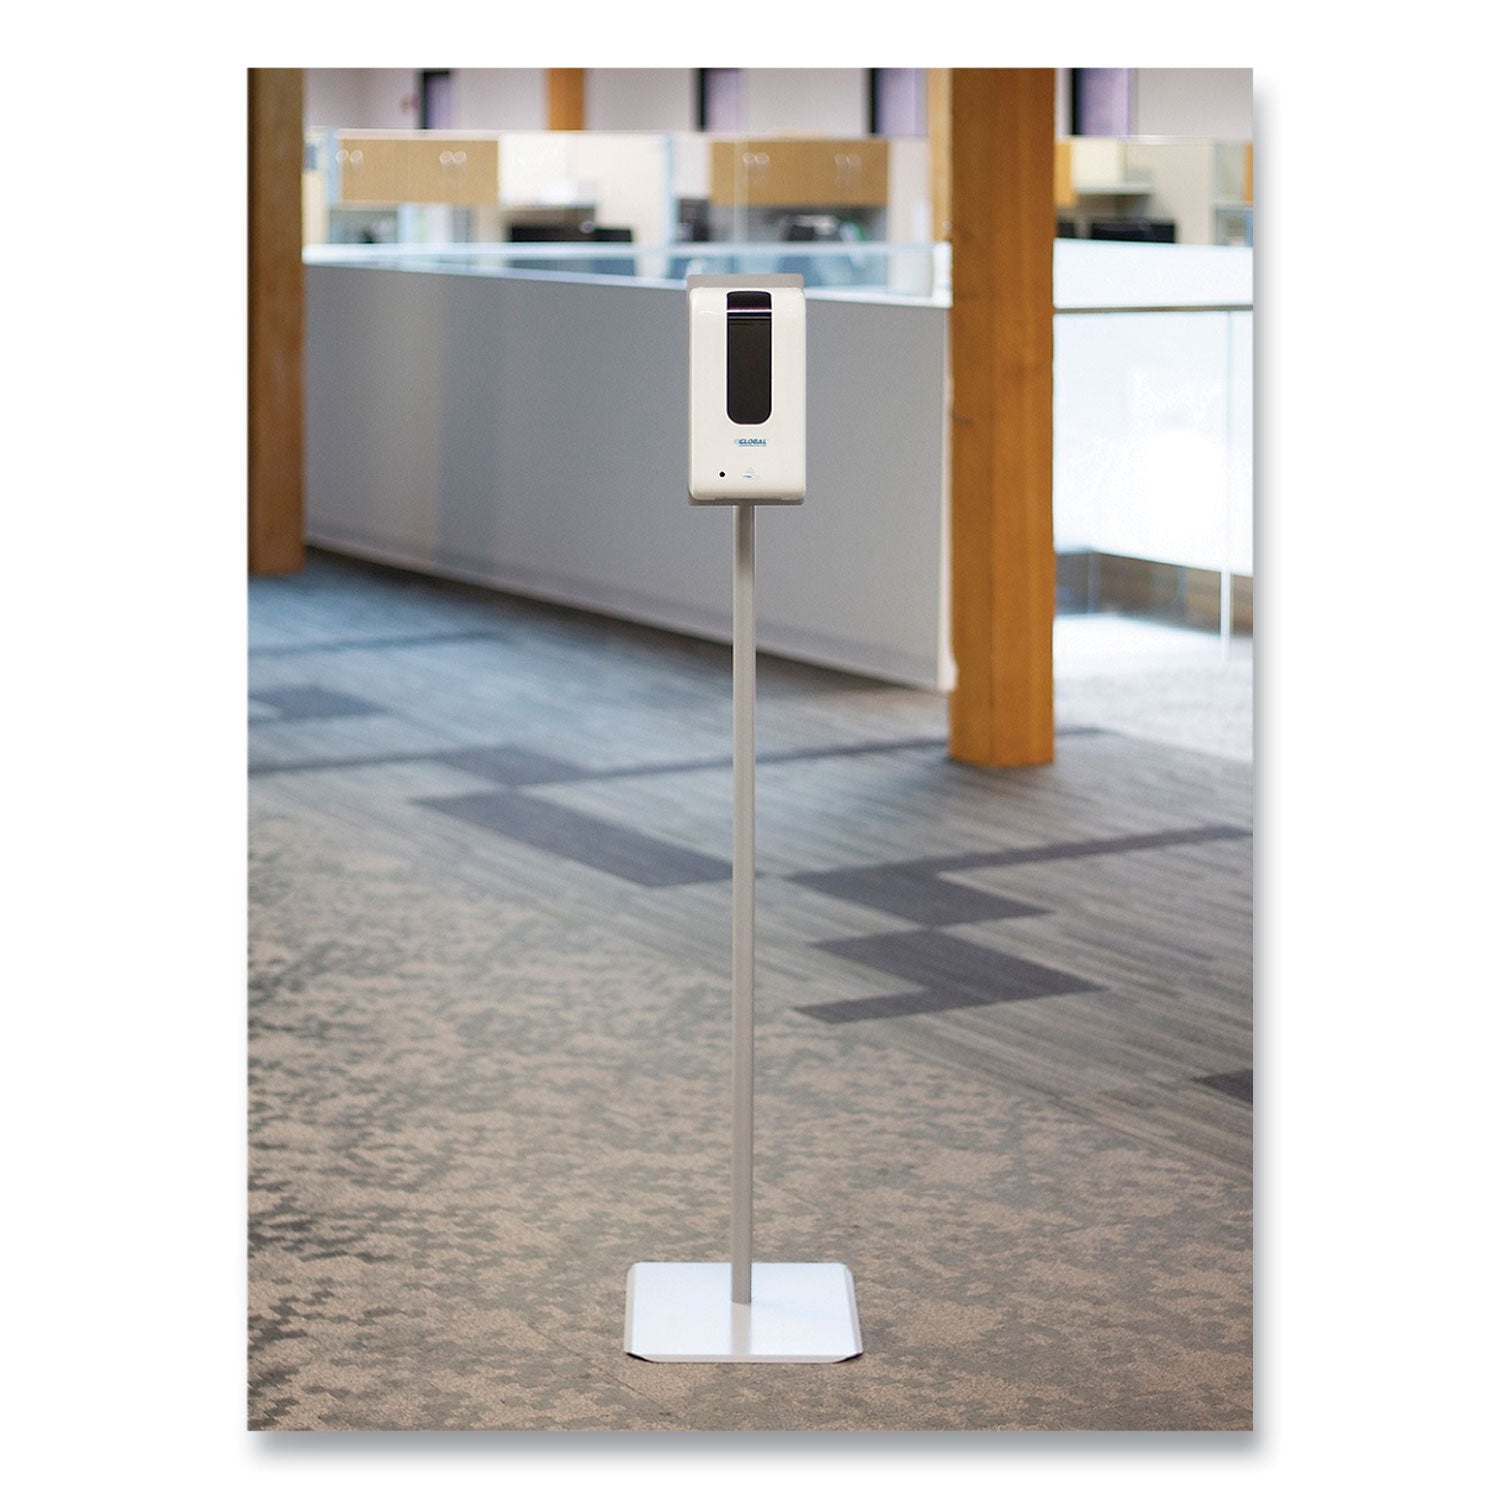 hand-sanitizer-station-stand-12-x-16-x-54-silver_honstandp8t - 5